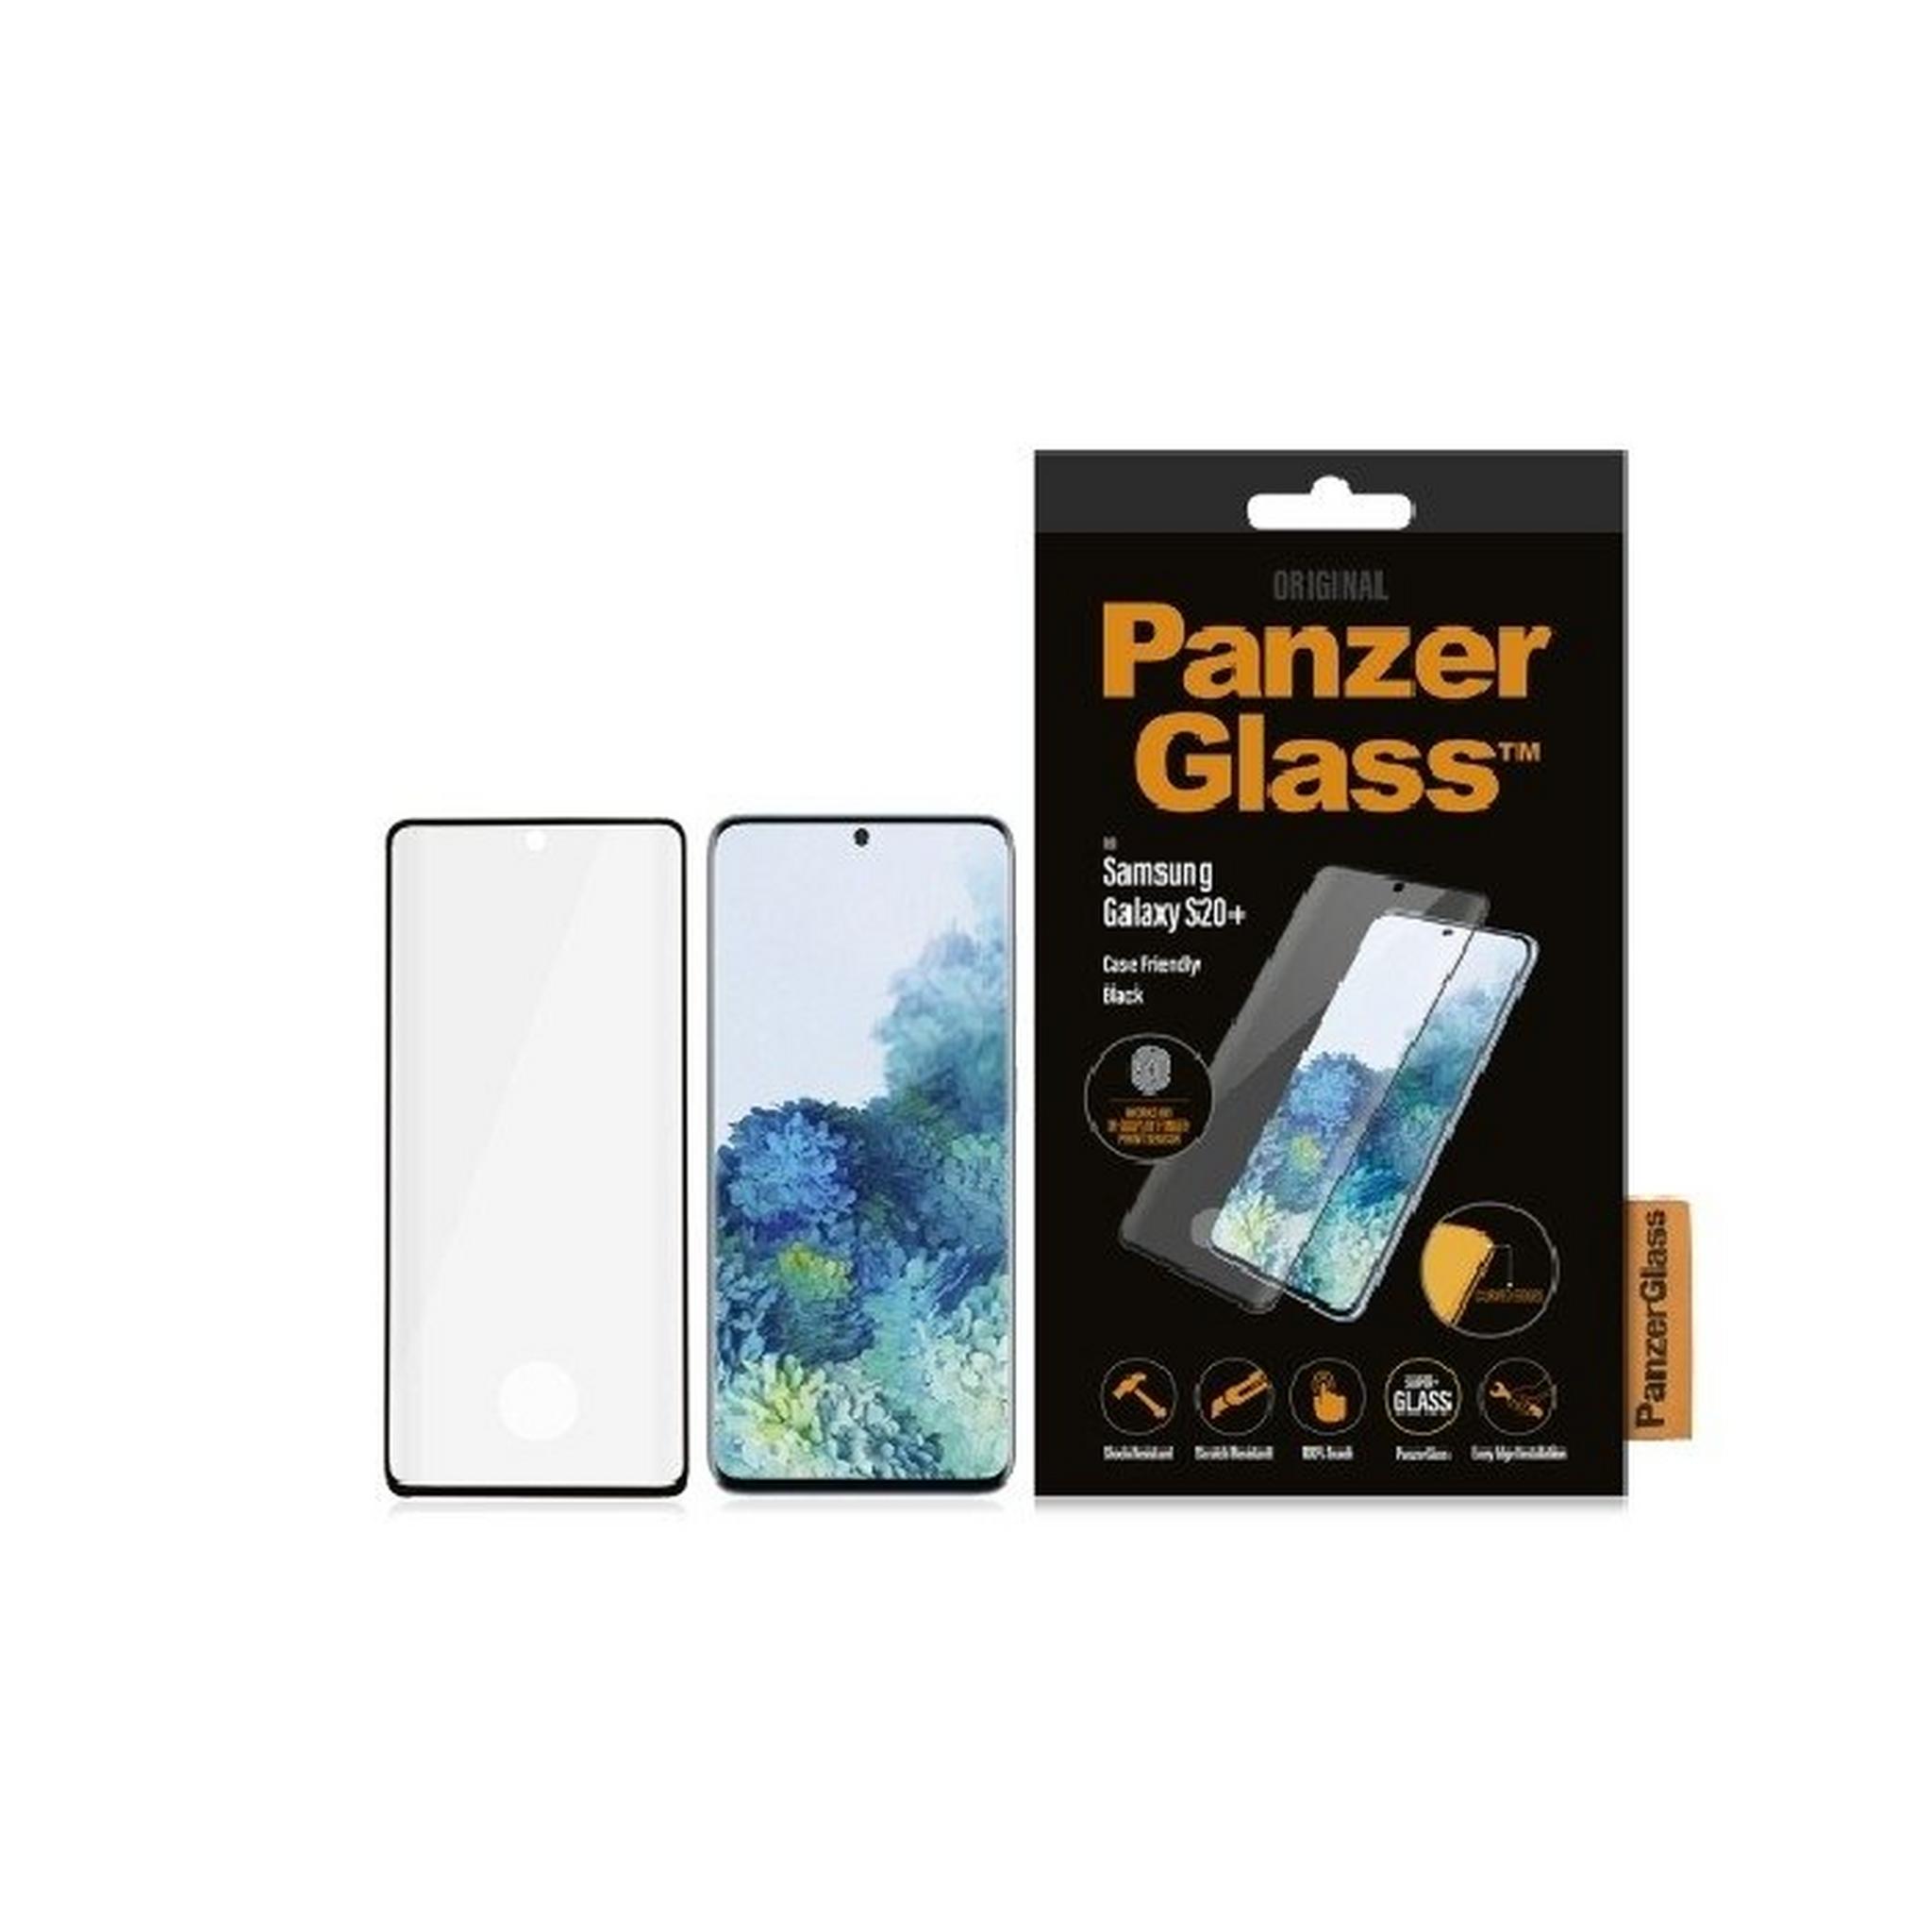 Panzer Samsung Galaxy S20+ Tempered Glass Screen Protector - Black